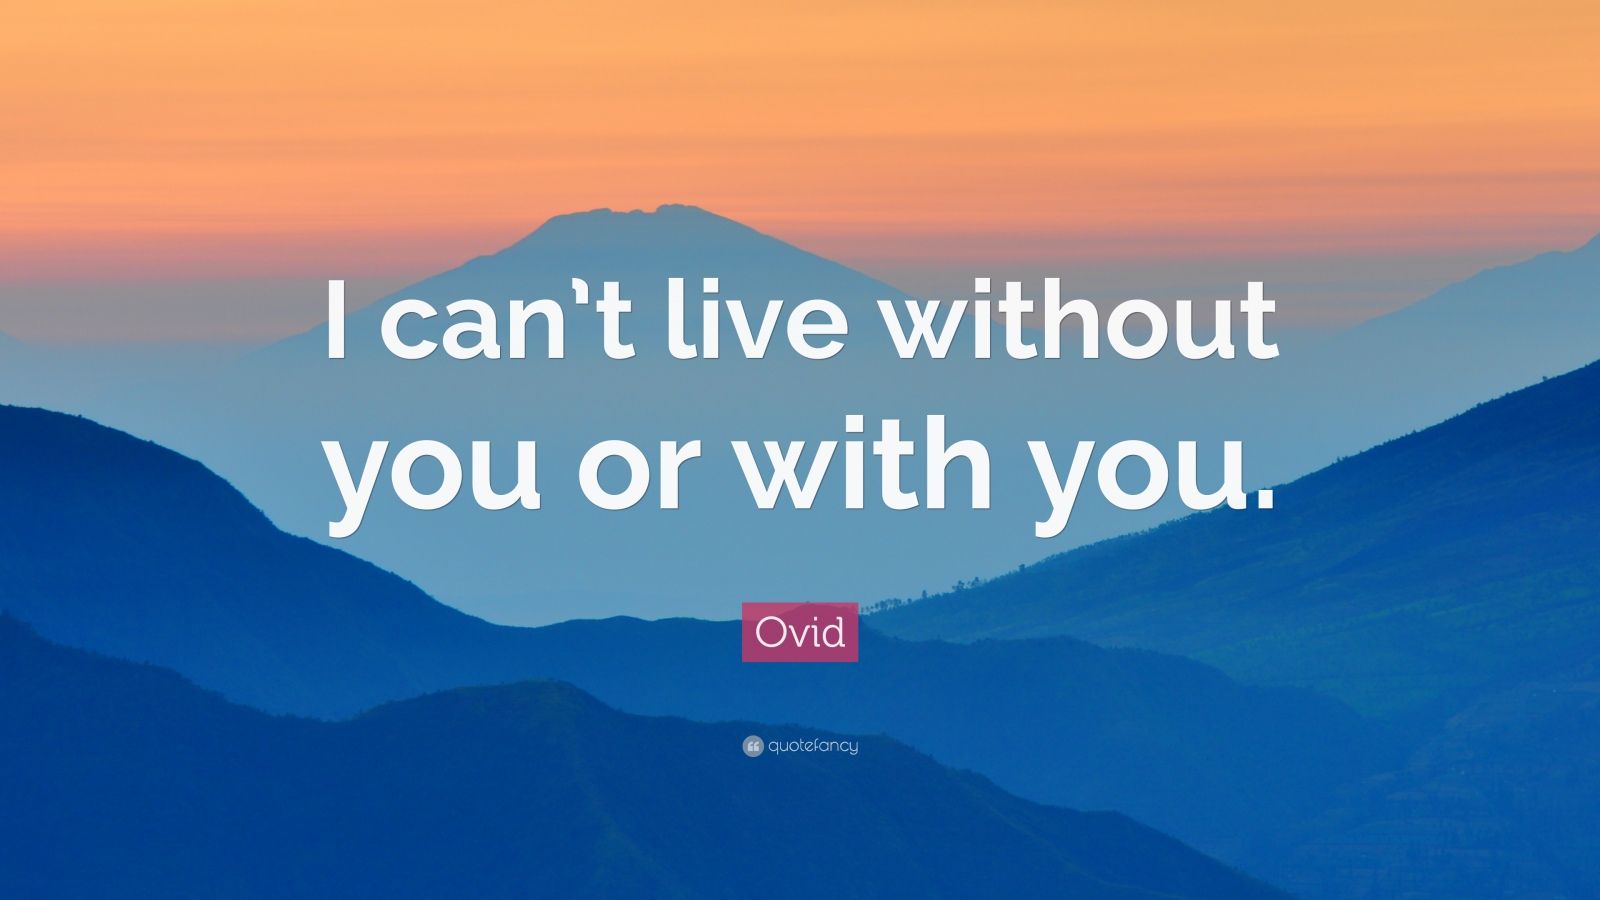 Ovid Quote: “I can’t live without you or with you.” (12 ...